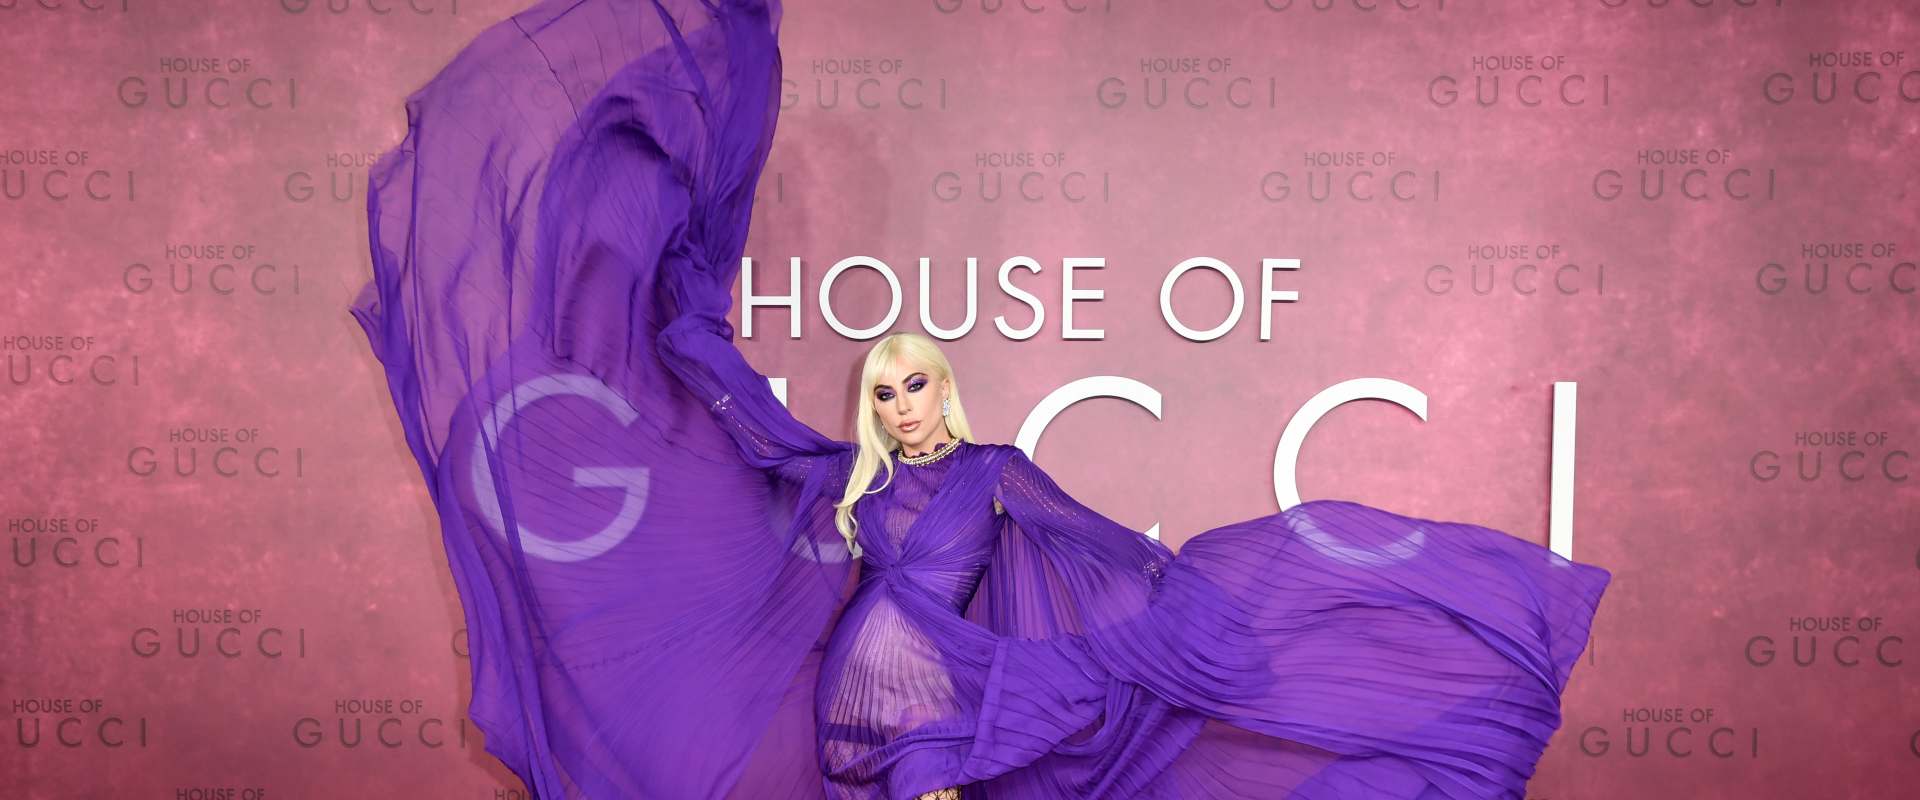 House of Gucci background 2